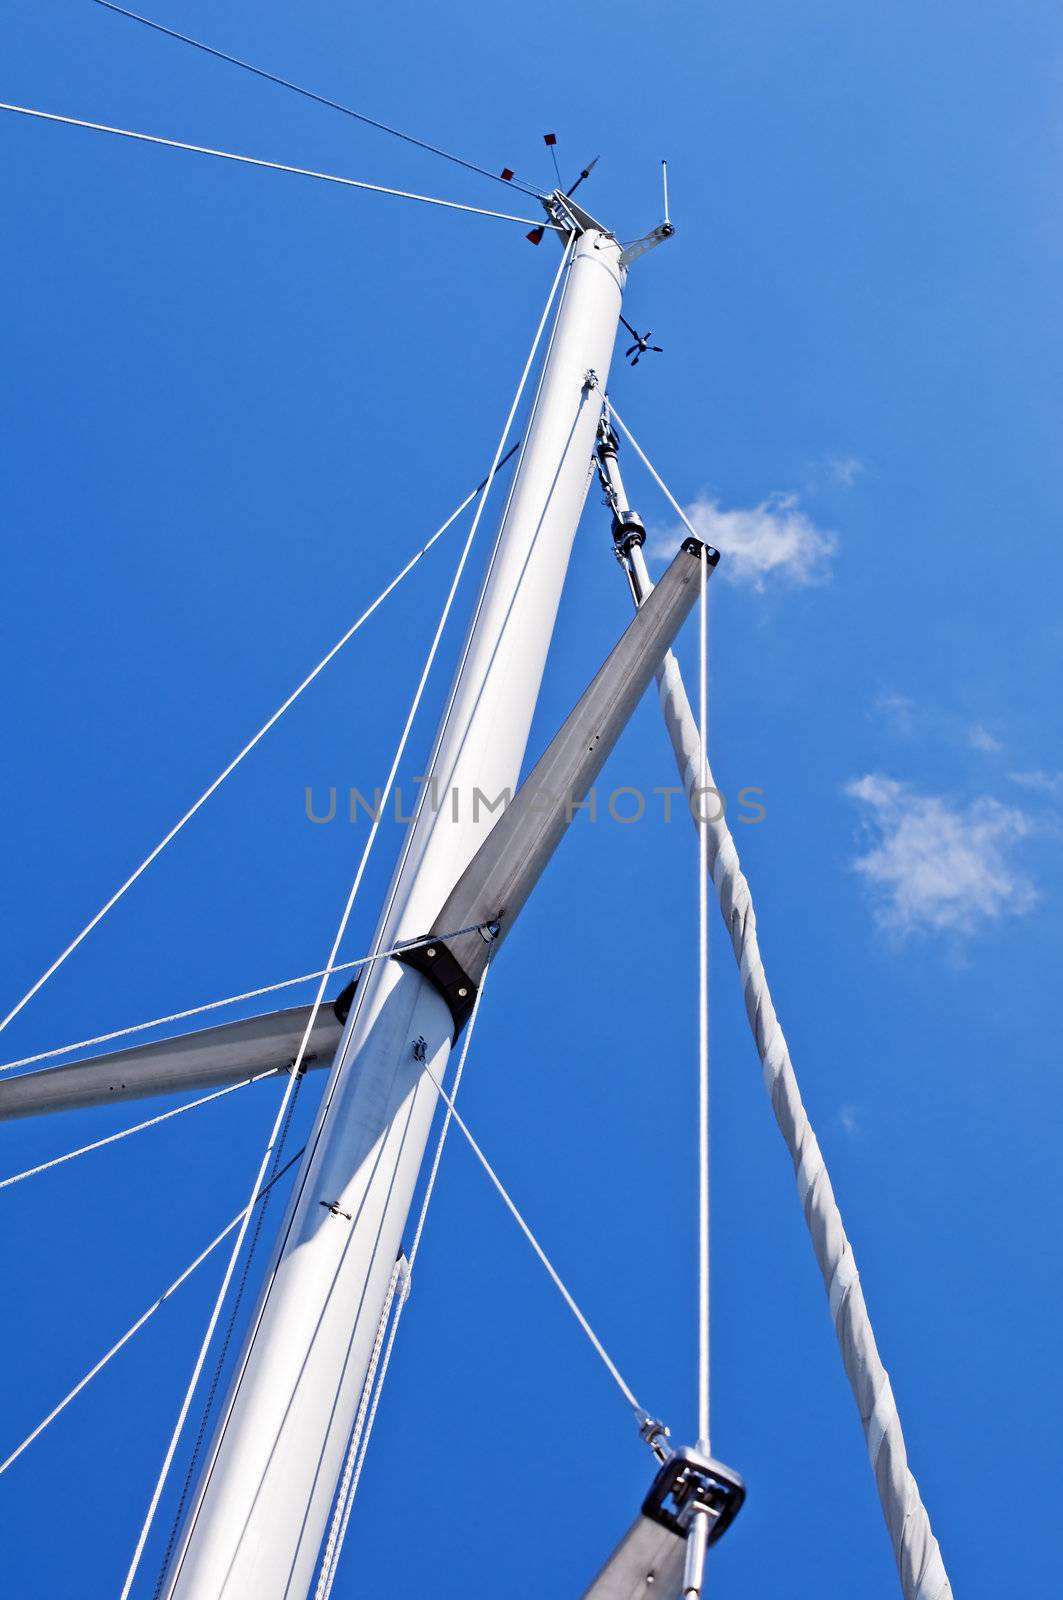 Mast of a sailboat against a blue sky